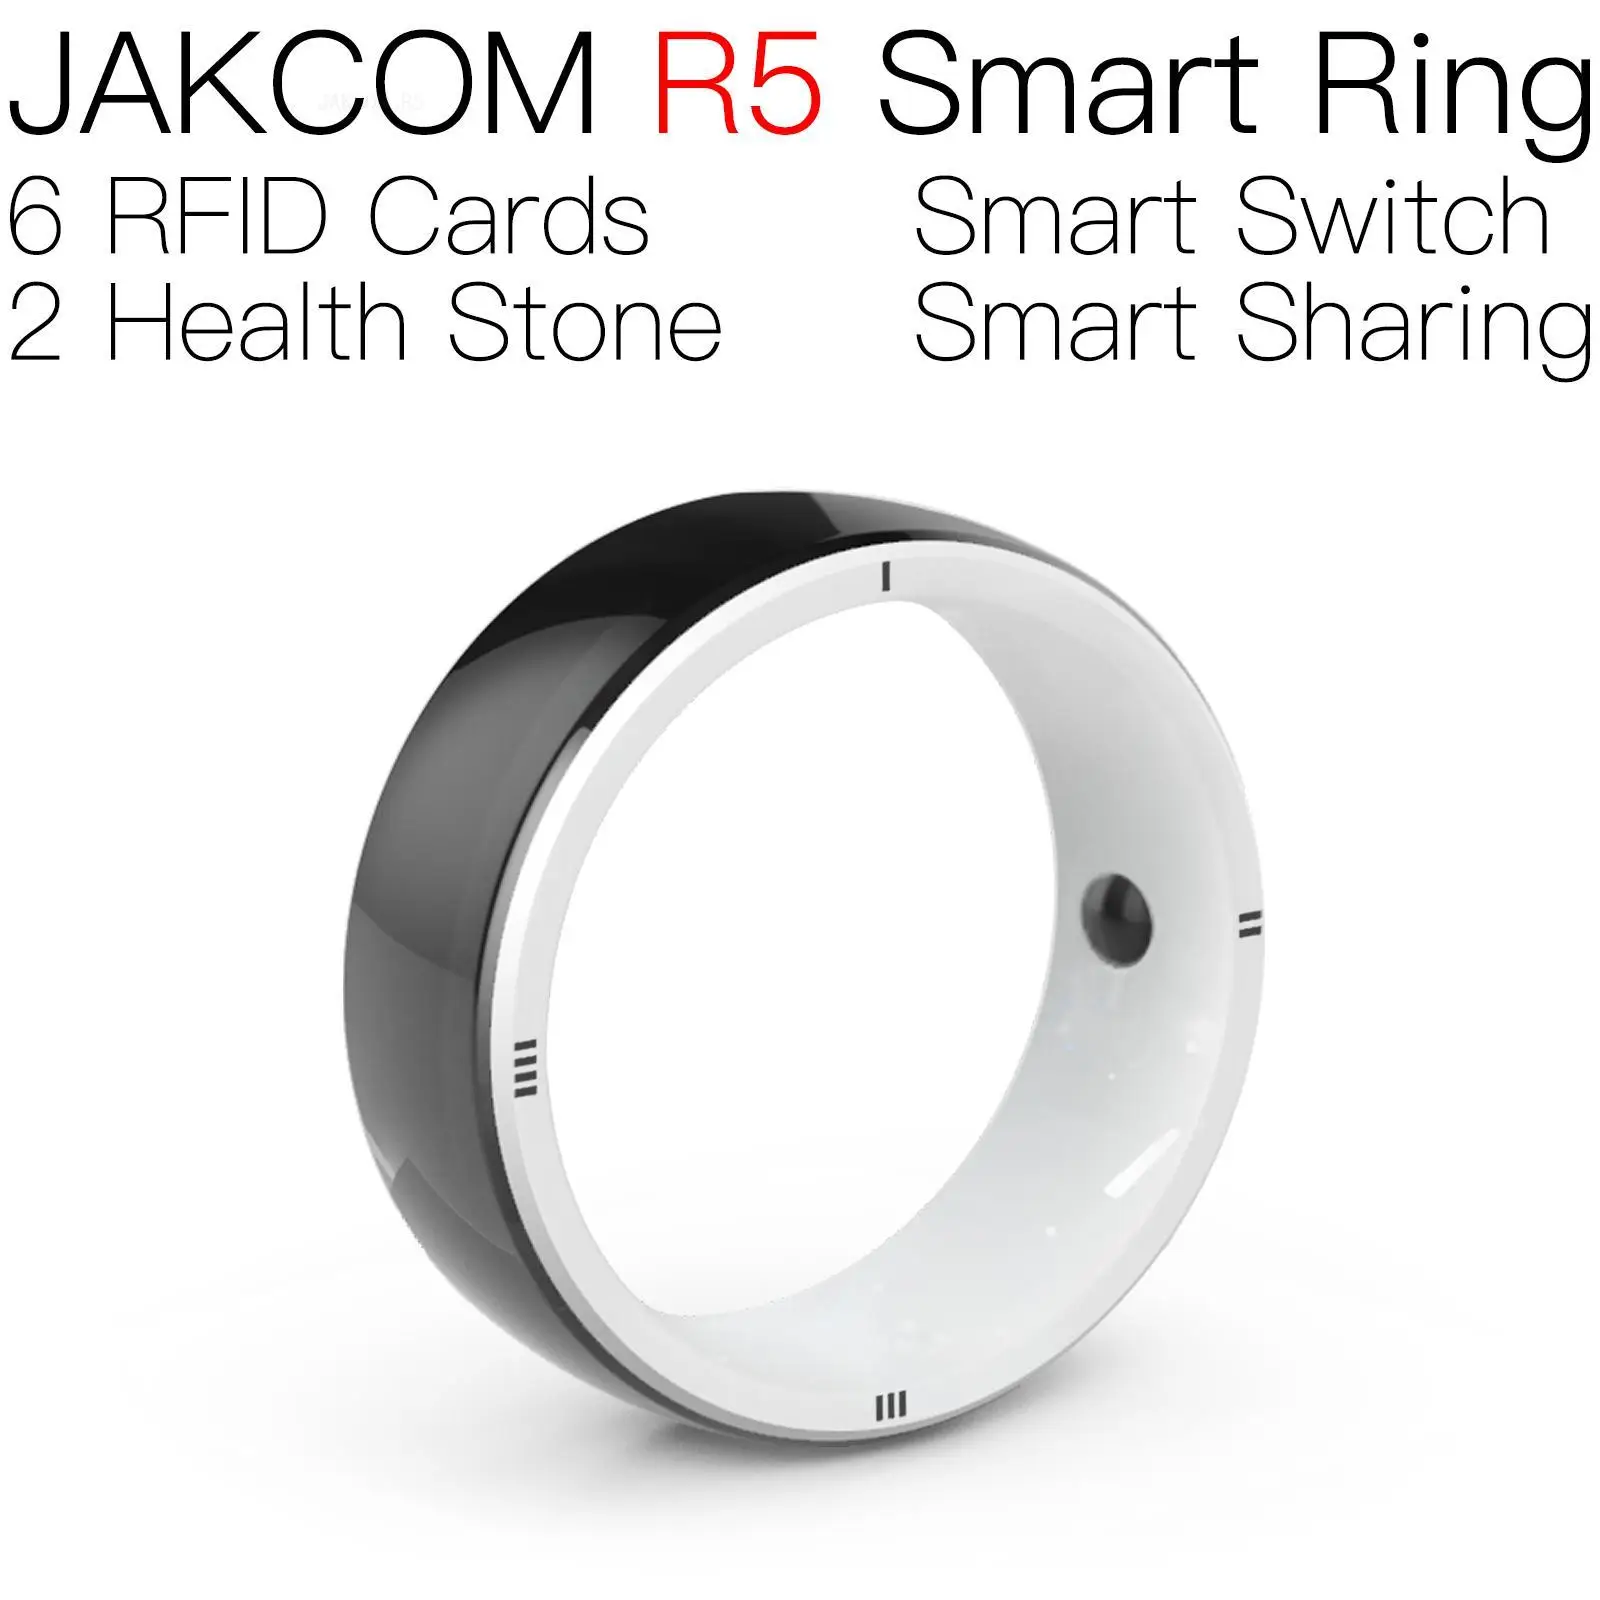 

JAKCOM R5 Smart Ring better than deauther tags rfid 125khz chip glas mhz long dual ic uid key tag sticker mct android id